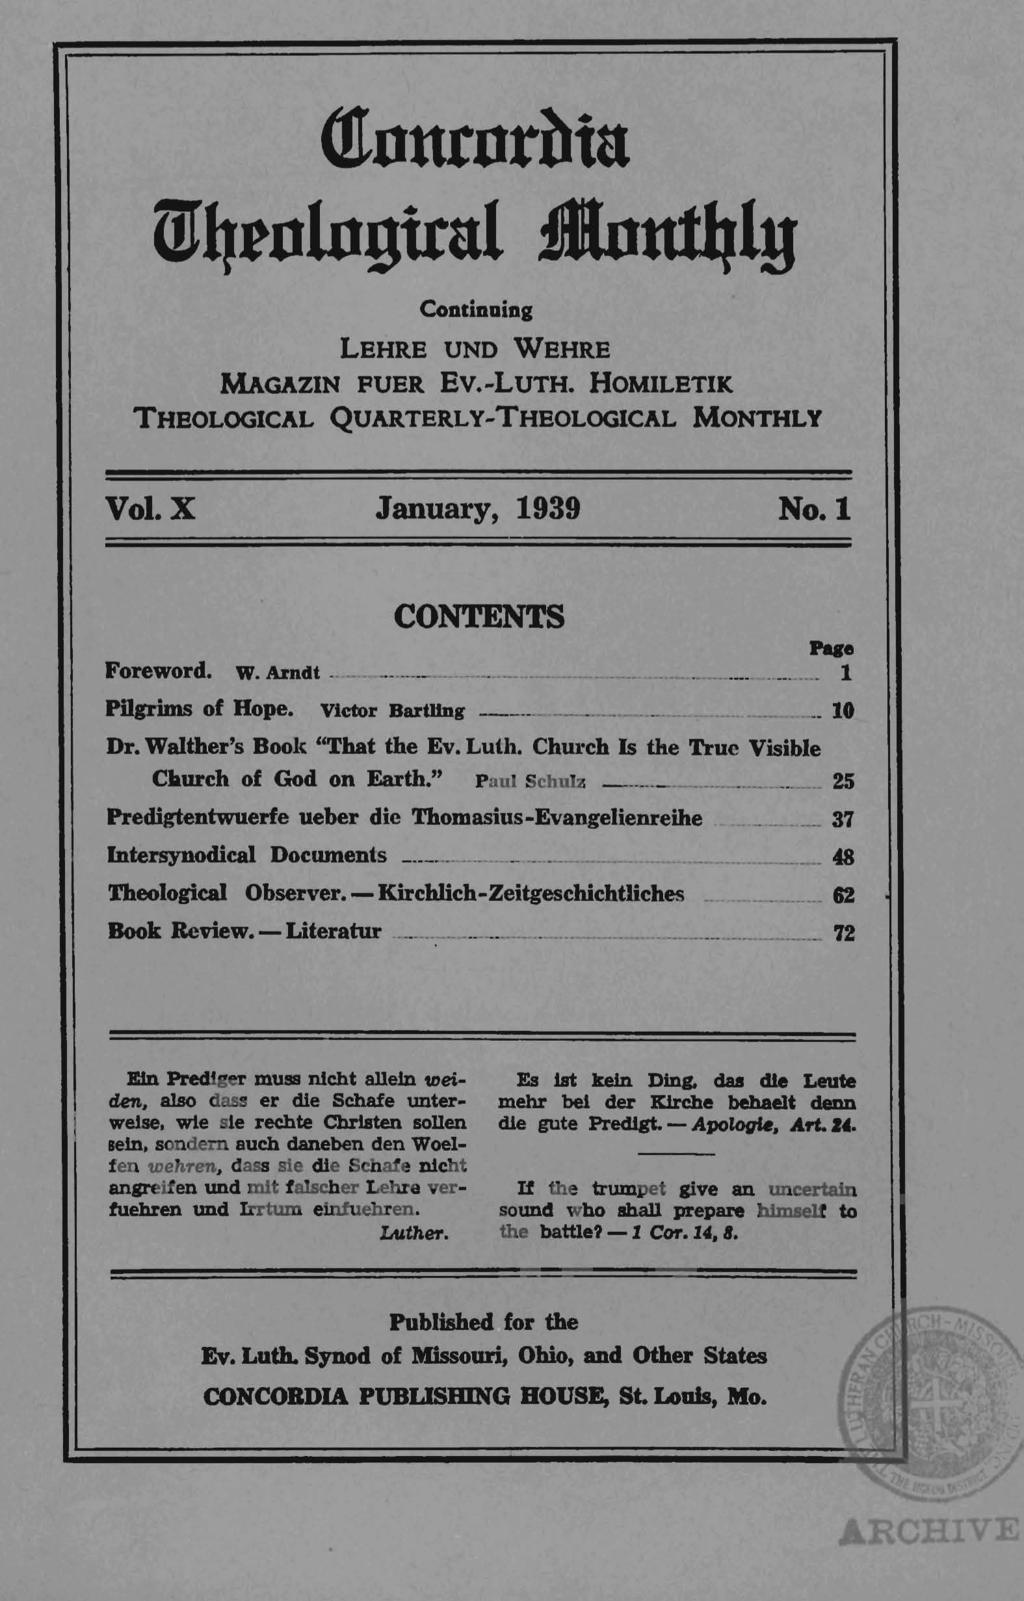 0 0 0 0_ 0 0_ arnurnr~ta m~tnln!lital Continuing Atn1l}ly LEHRE UNO ~EHRE MAGAZIN PUER Ev.-LuTH. HOMILETIK THEOLOGICAL QUARTERLY-THEOLOGICAL MONTHLY Vol. X January, 1939 No.1 Foreword. W.